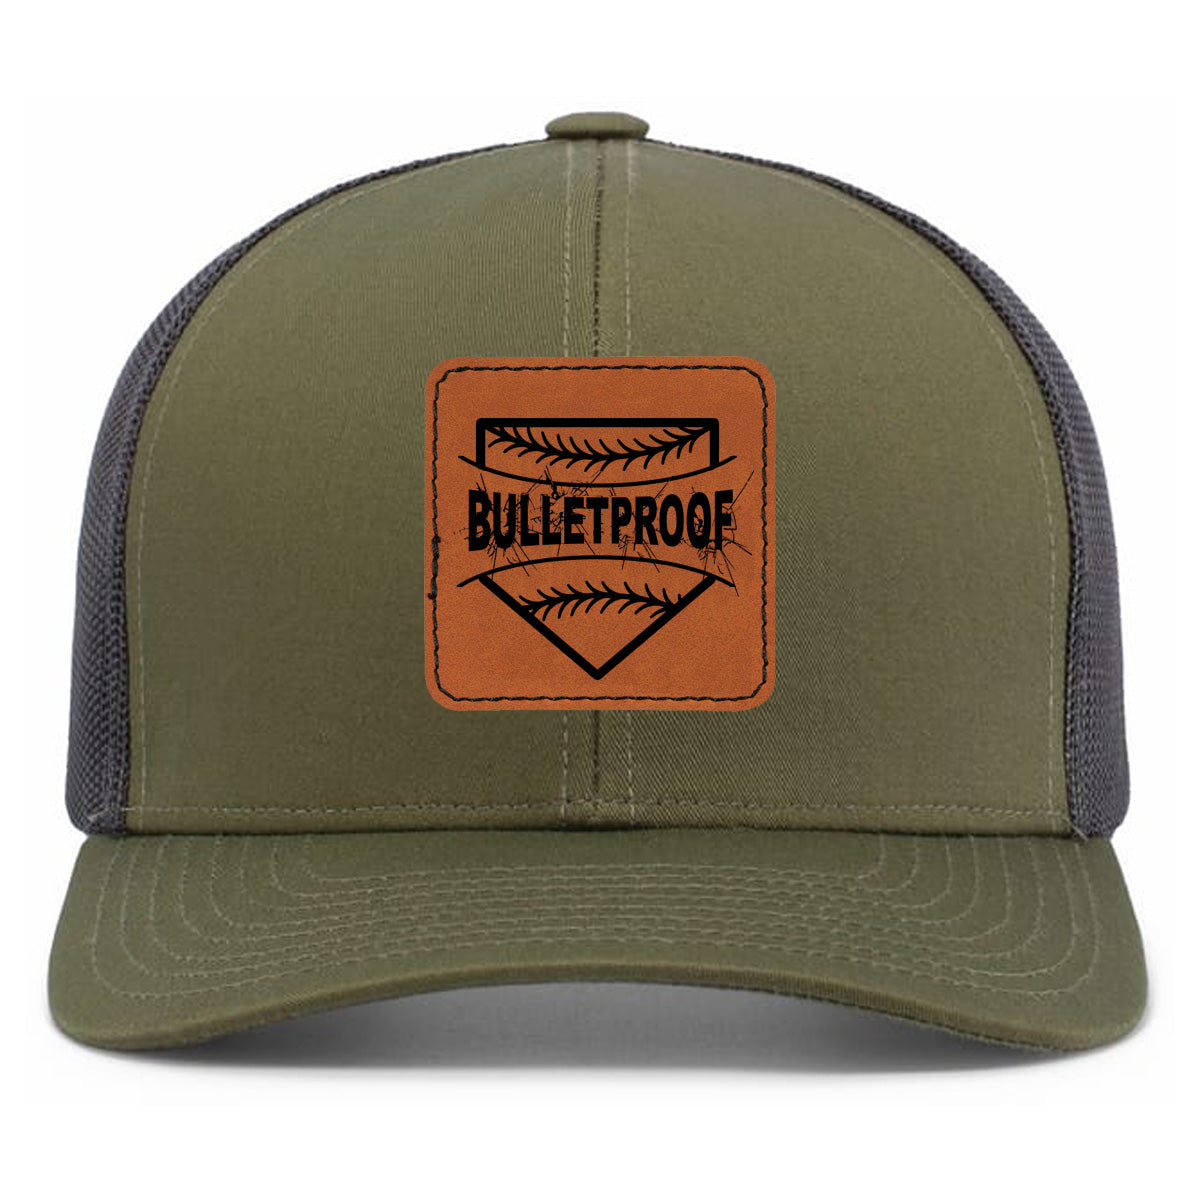 Bulletproof Fastpitch - Trucker Snapback Cap with Leather Patch - Moss Green/Lt Charcoal/Moss Green (104C) - Southern Grace Creations